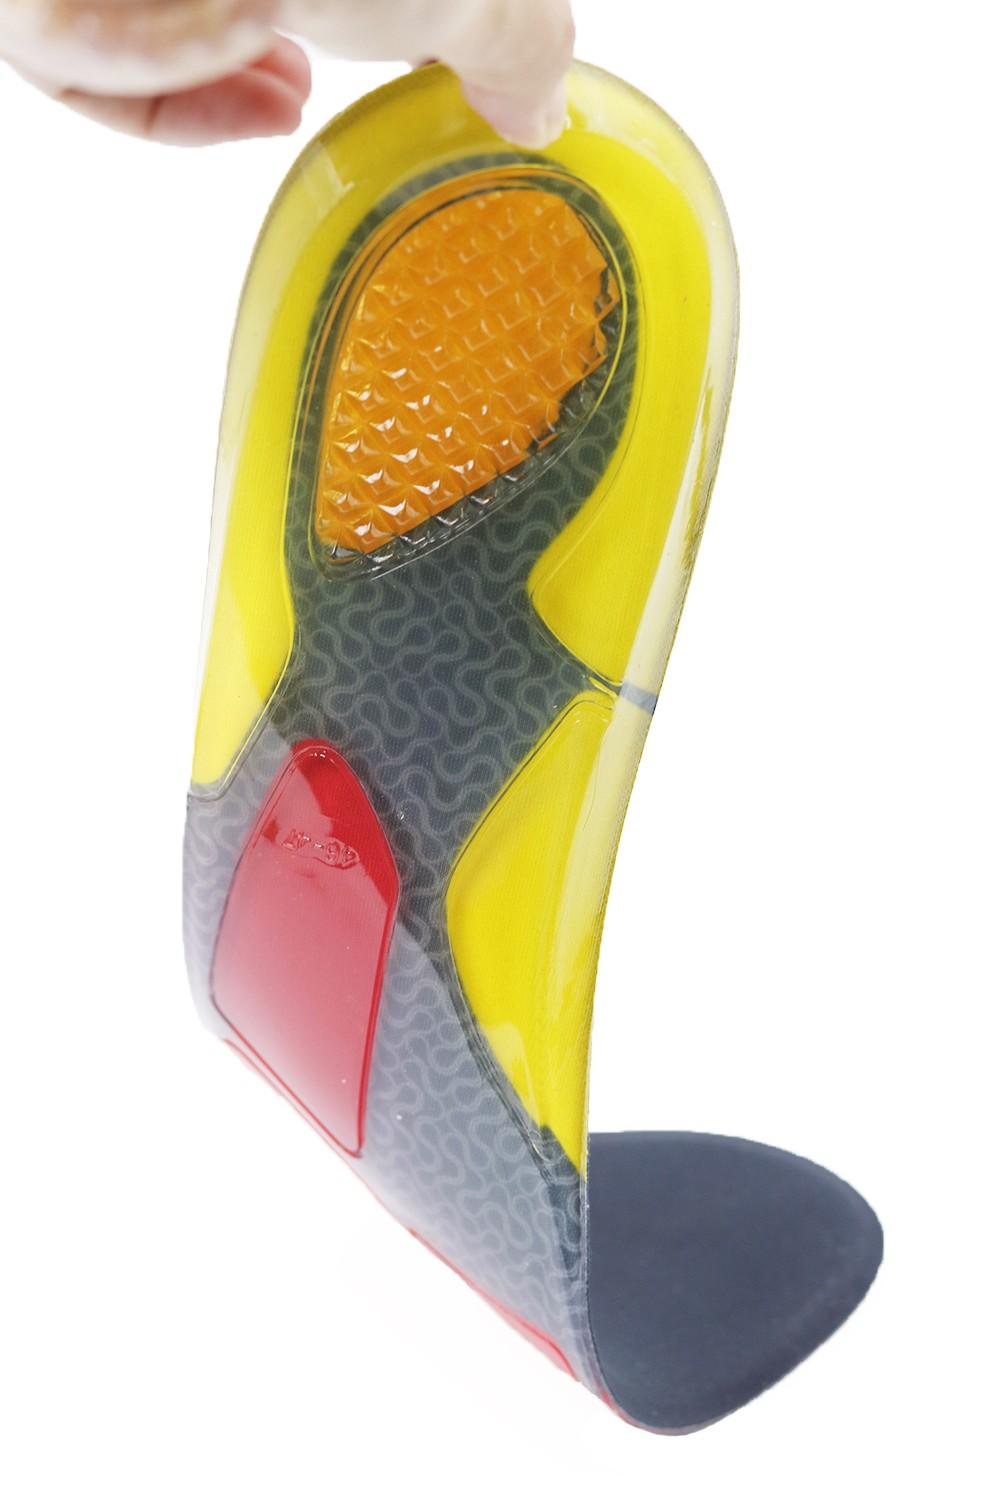 S-King gel insoles for sandals company for forefoot pad